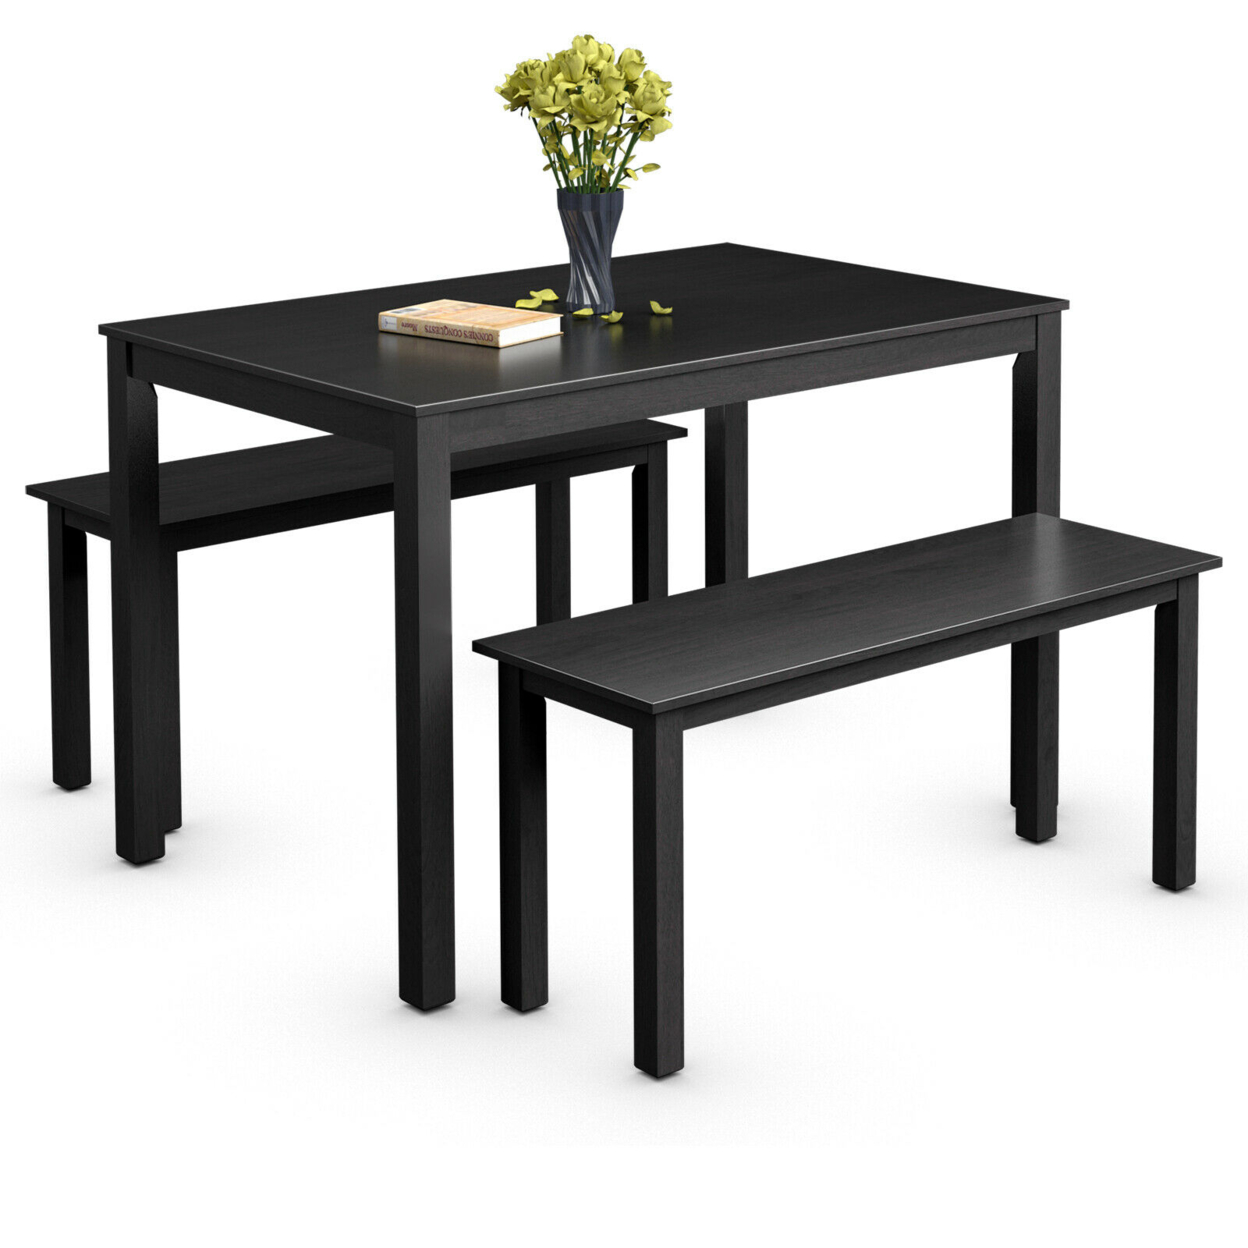 3pcs Dining Set Modern Studio Collection Table With 2 Benches Wood Legs Black